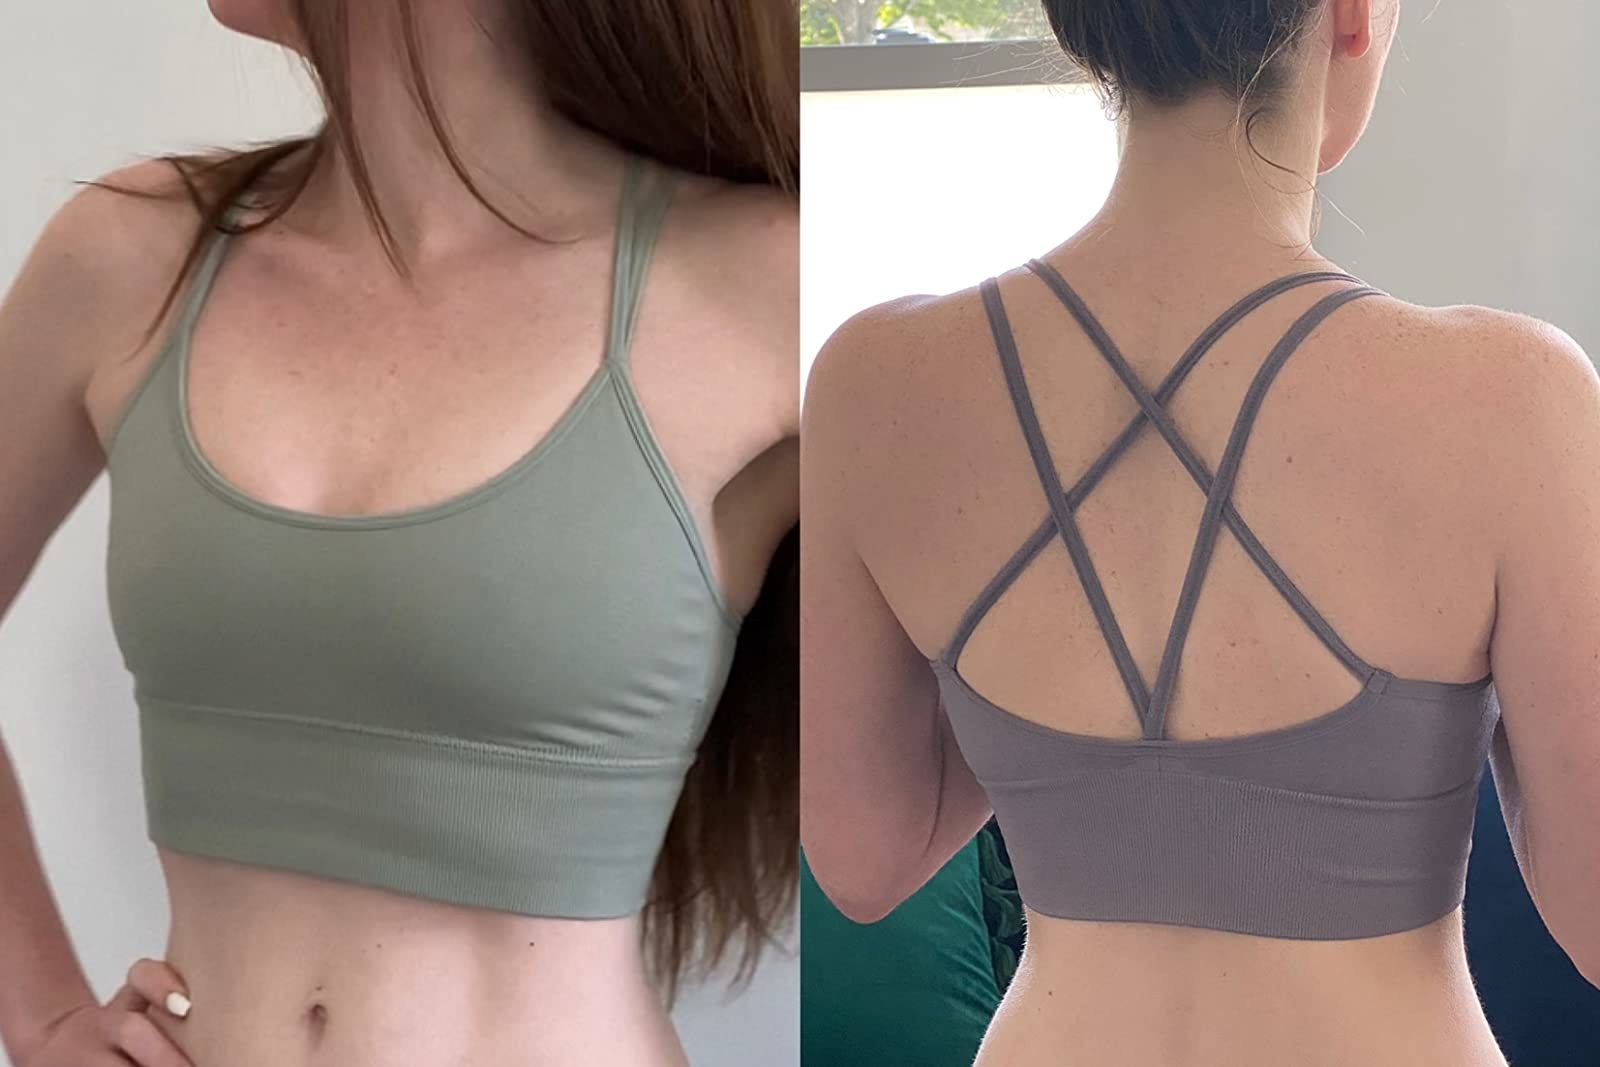 Reviewer photo of the bra in green and purple from the front and back